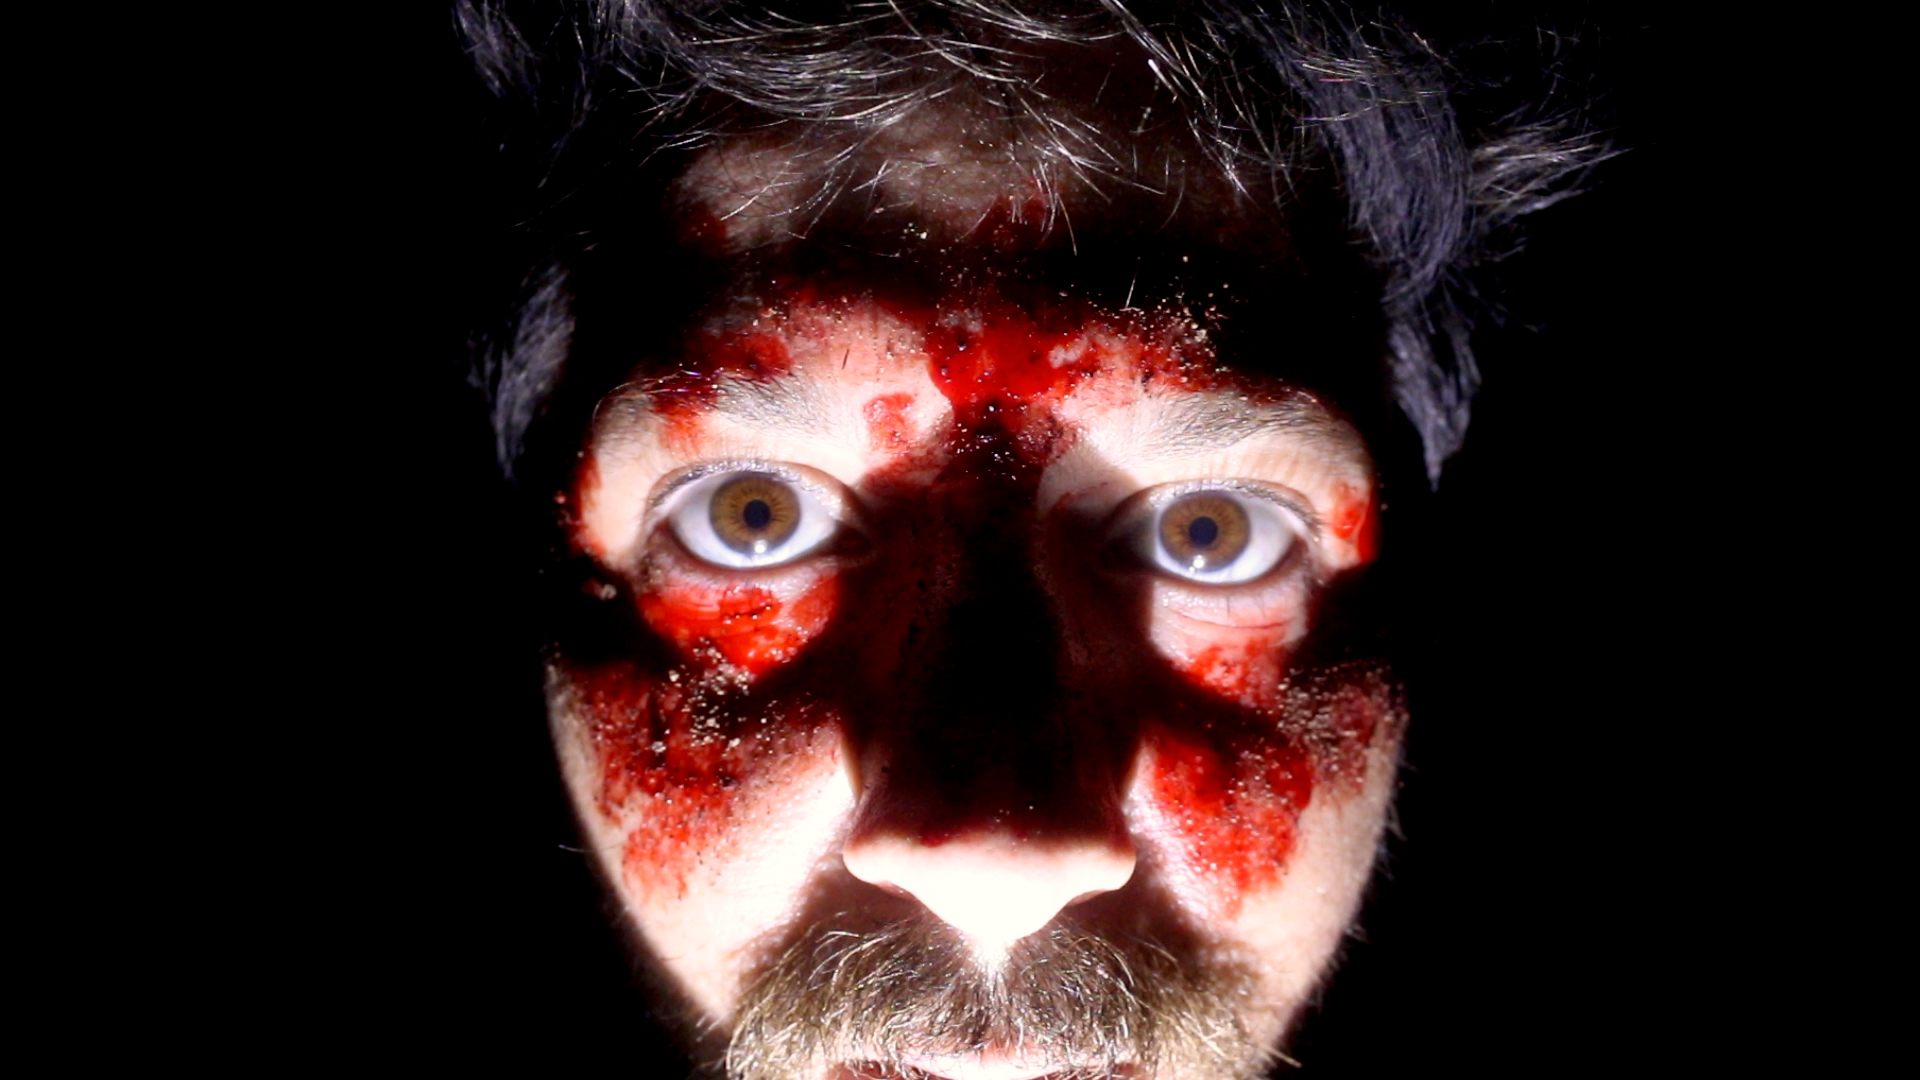 Robbie Banfitch stares at the camera with blood on his face in The Outwaters